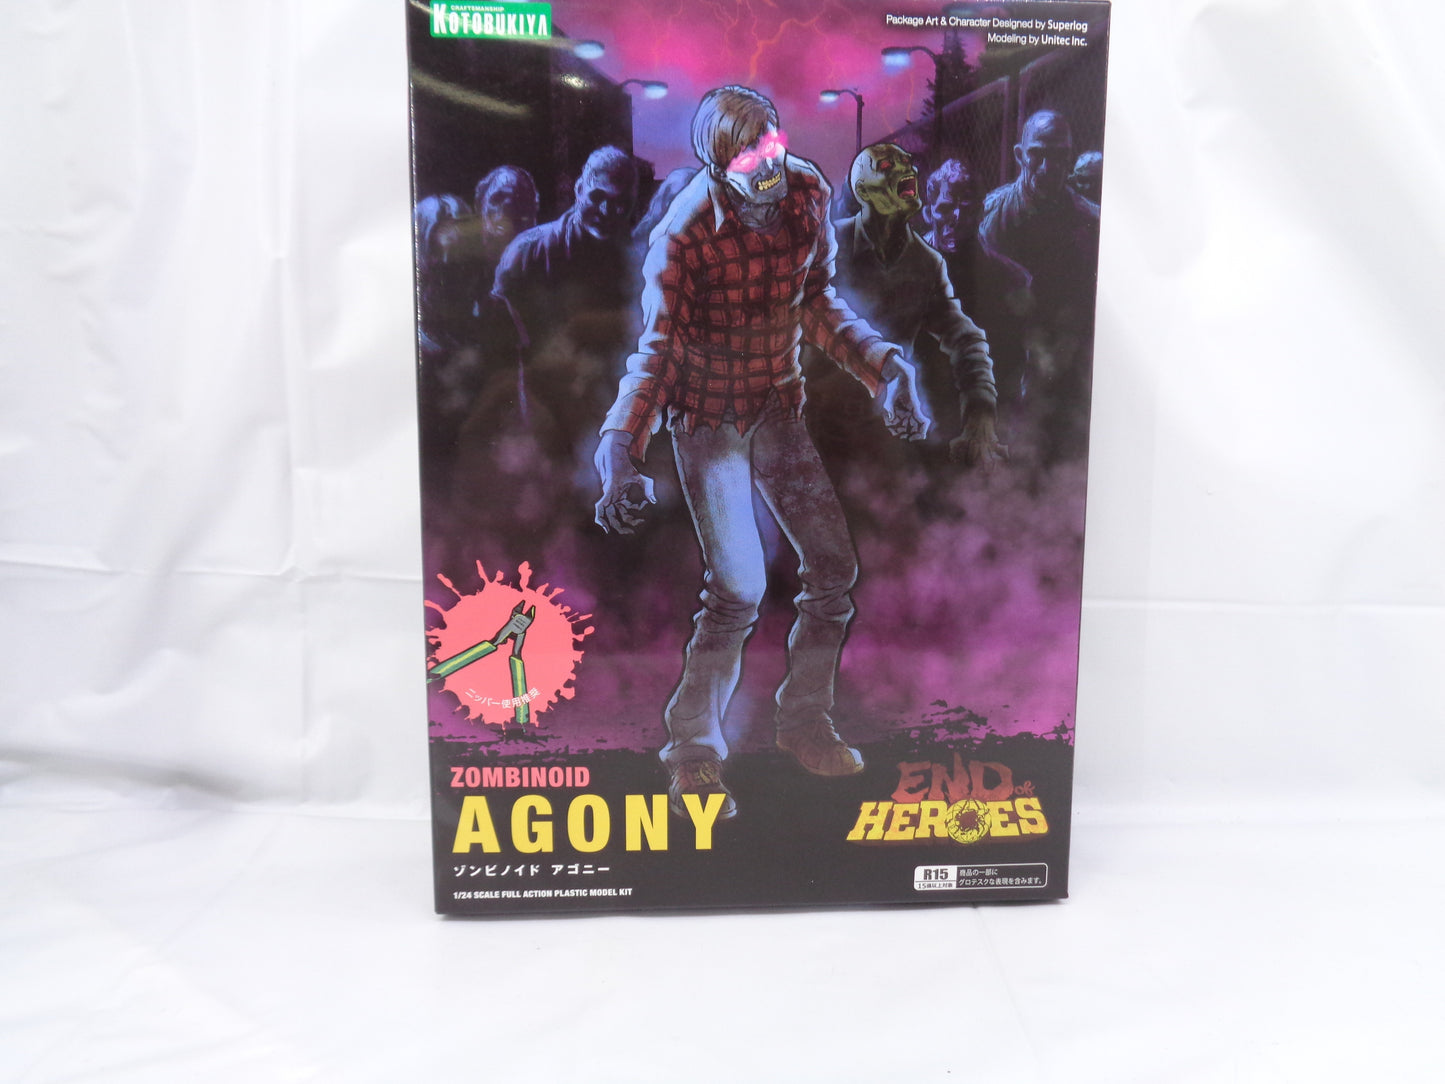 ZOMBINOID 1/24 END OF HEROES Agony Plastikmodell 